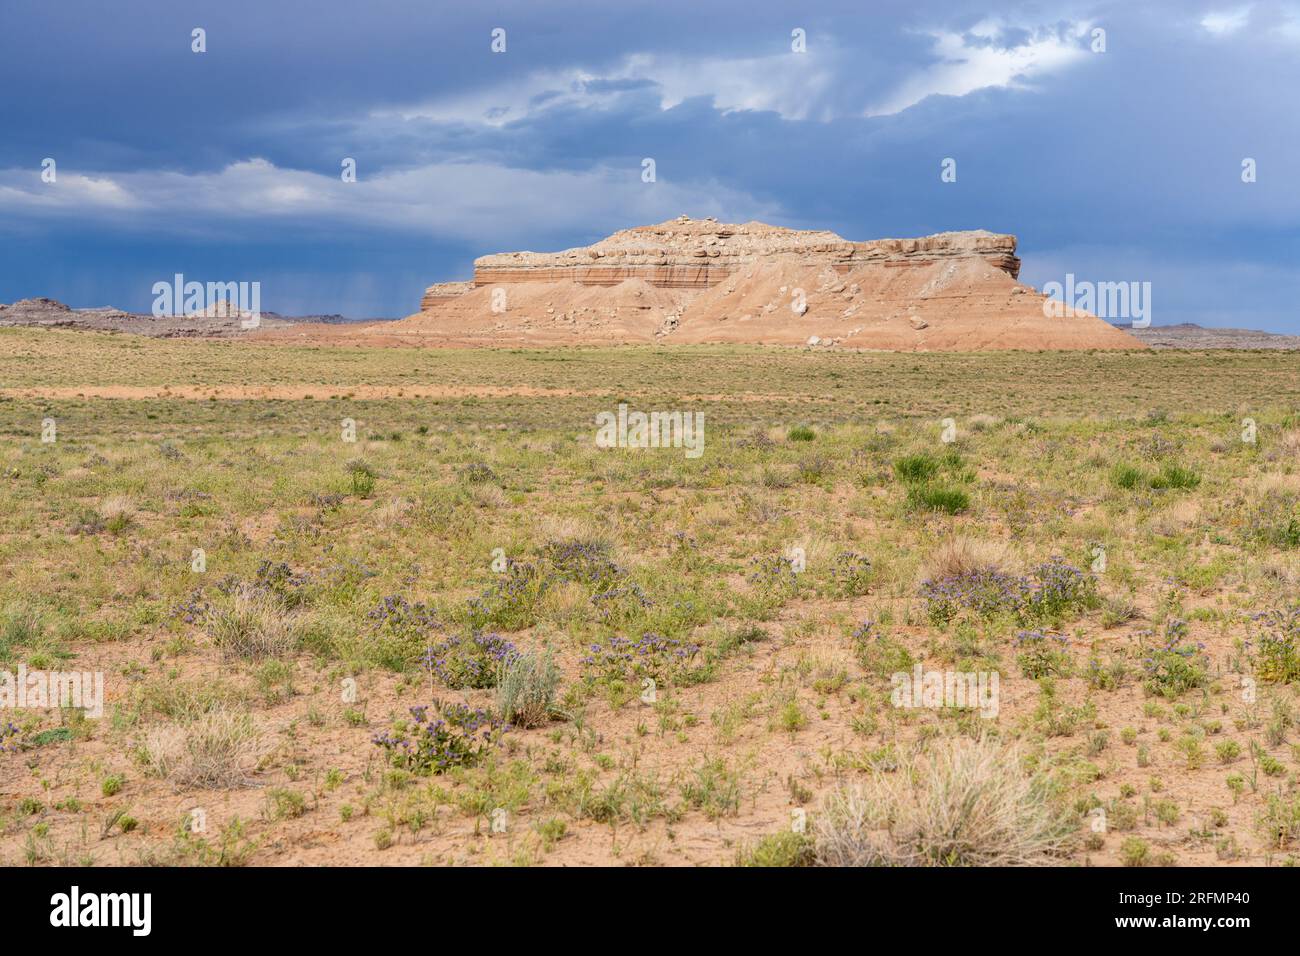 Sandstone butte in the San Rafael Desert with a thunderstorm in the distance. Scorpionweed blooming in foreground.  Utah. Stock Photo